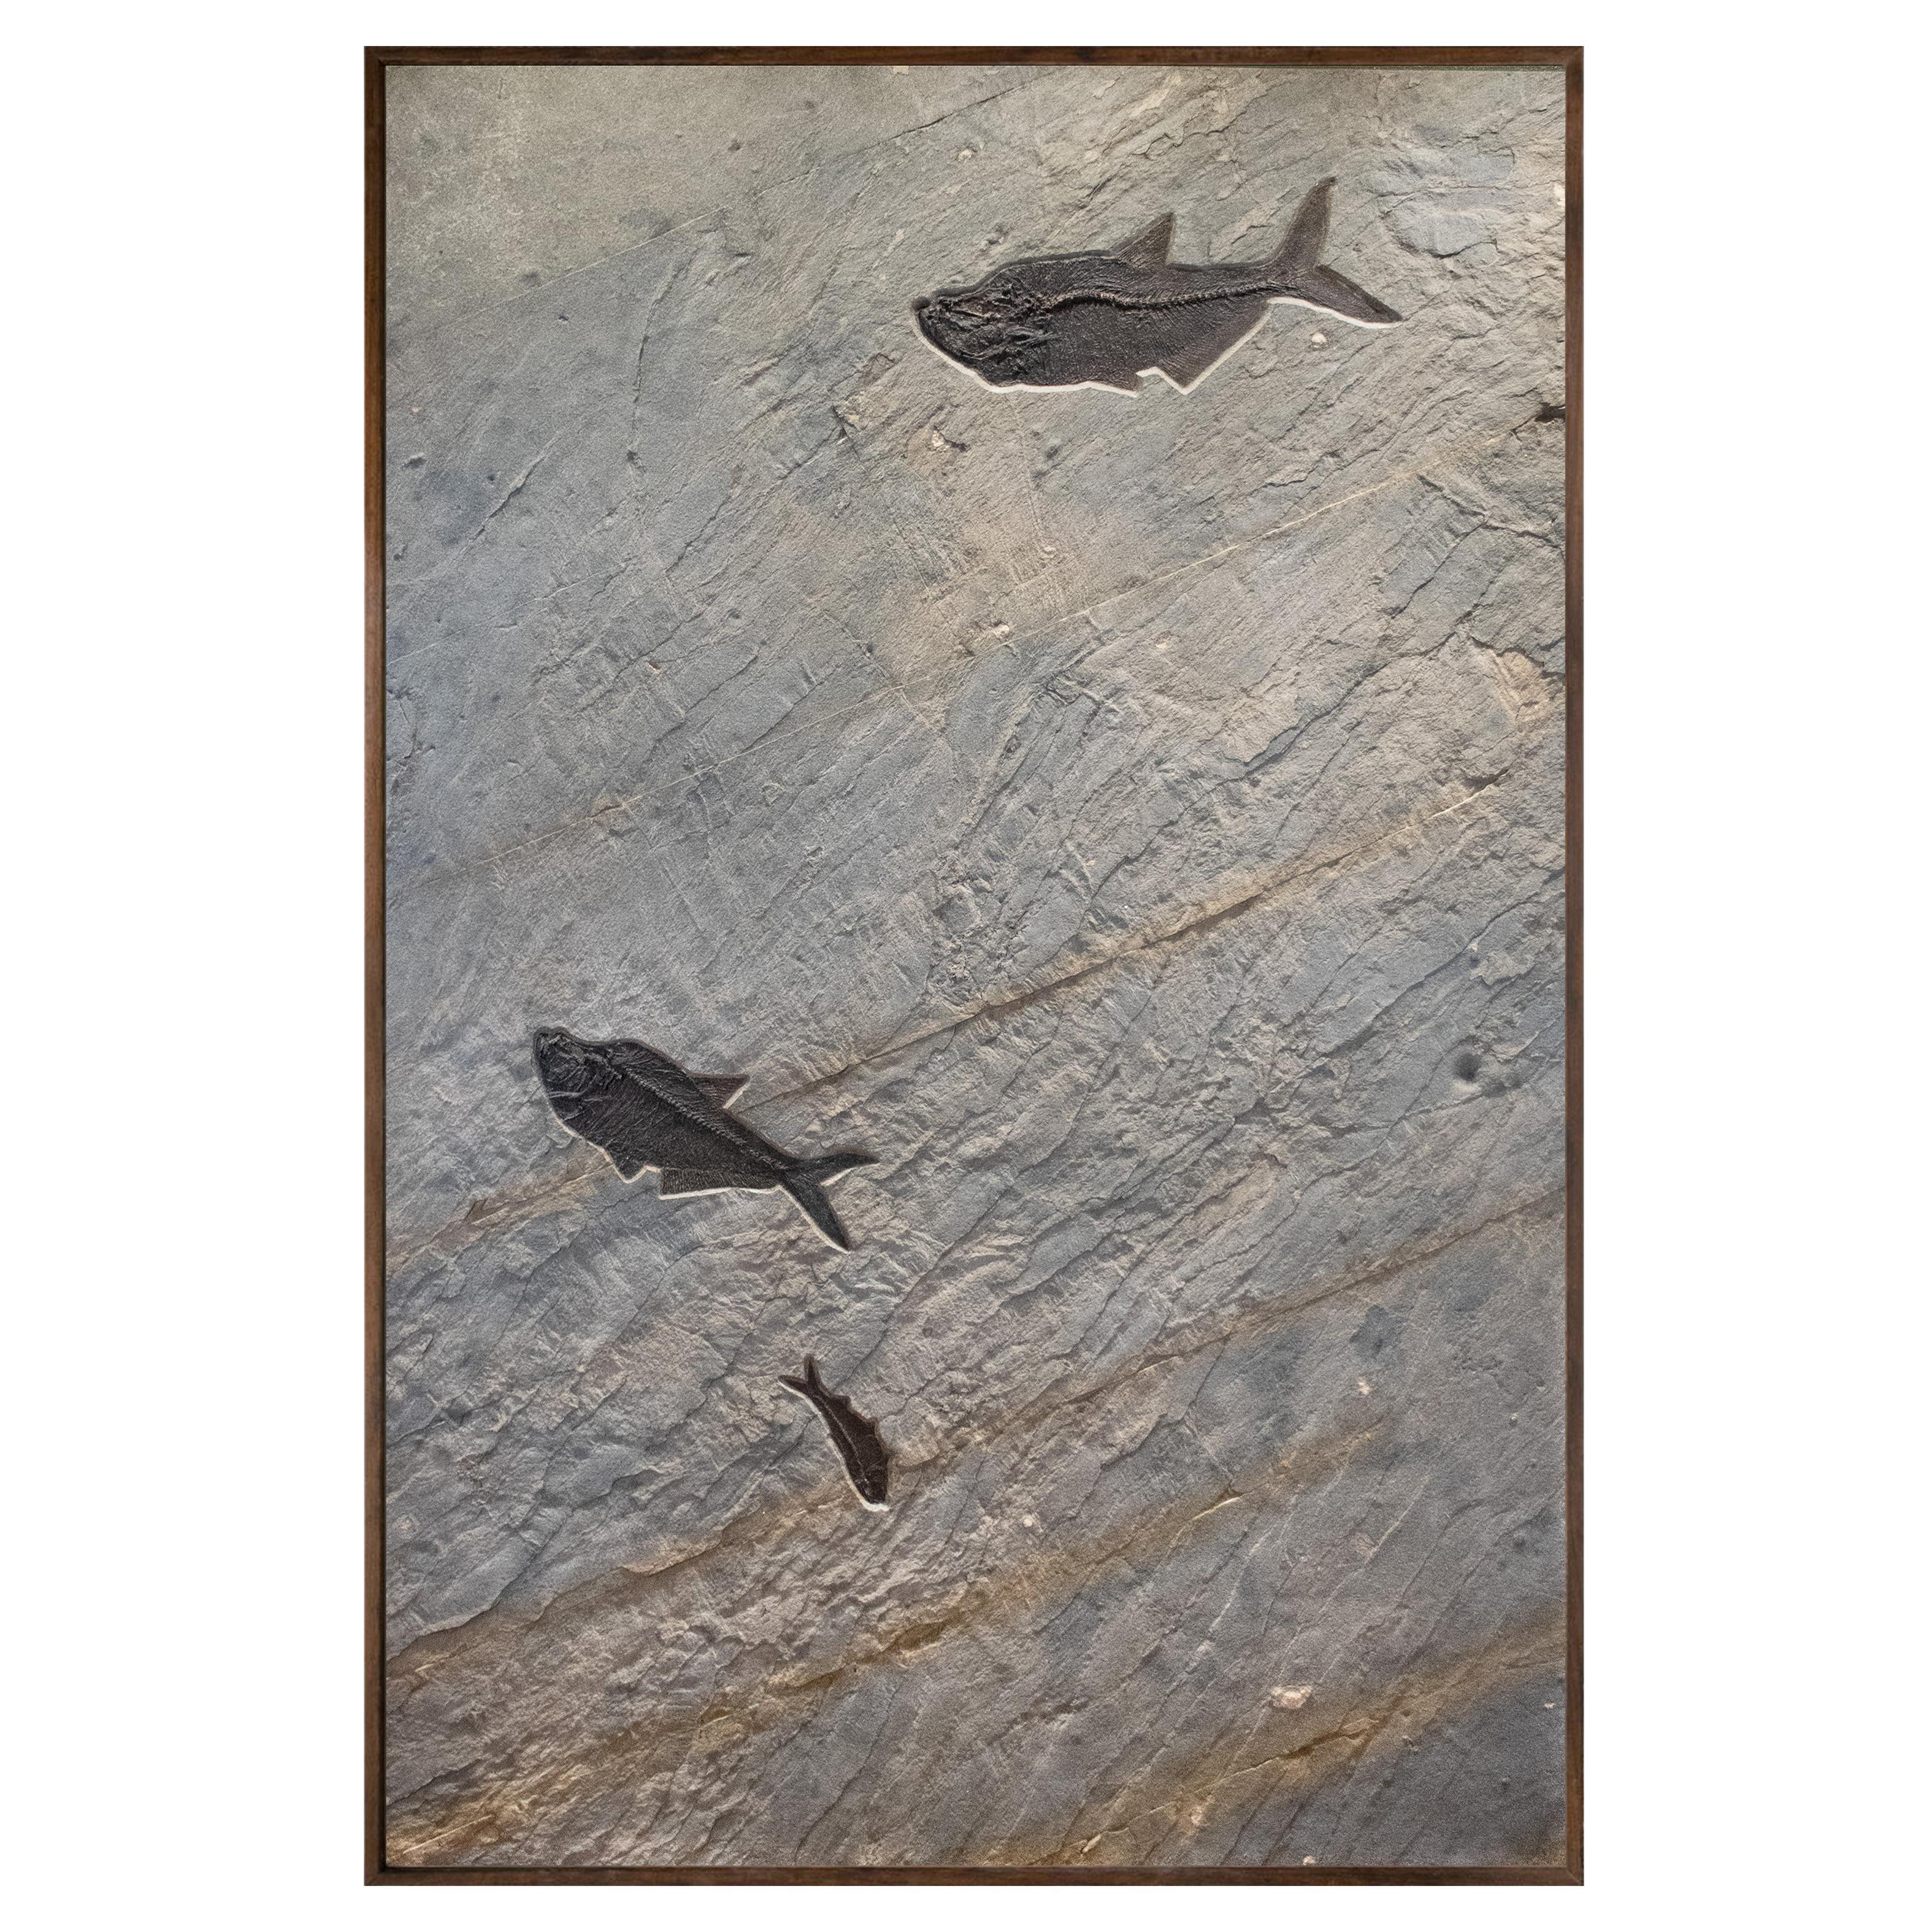 50 Million Year Old Fossil Fish Mural from the Green River Formation, Wyoming